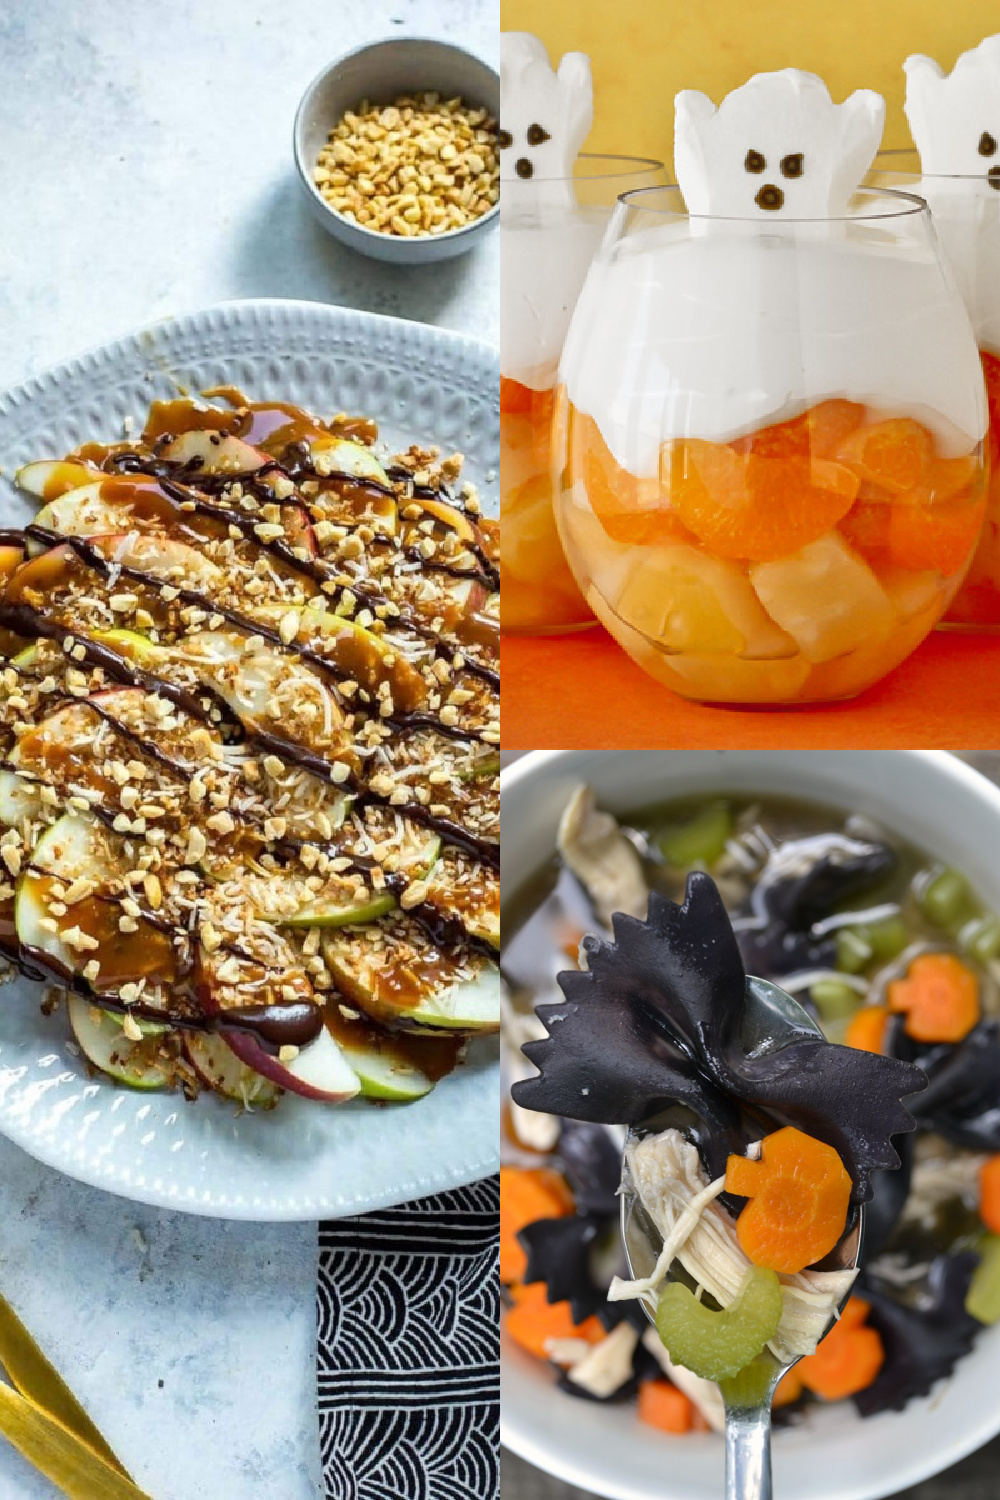 20 Easy and Delicious Healthy Halloween Recipes That Taste Amazing